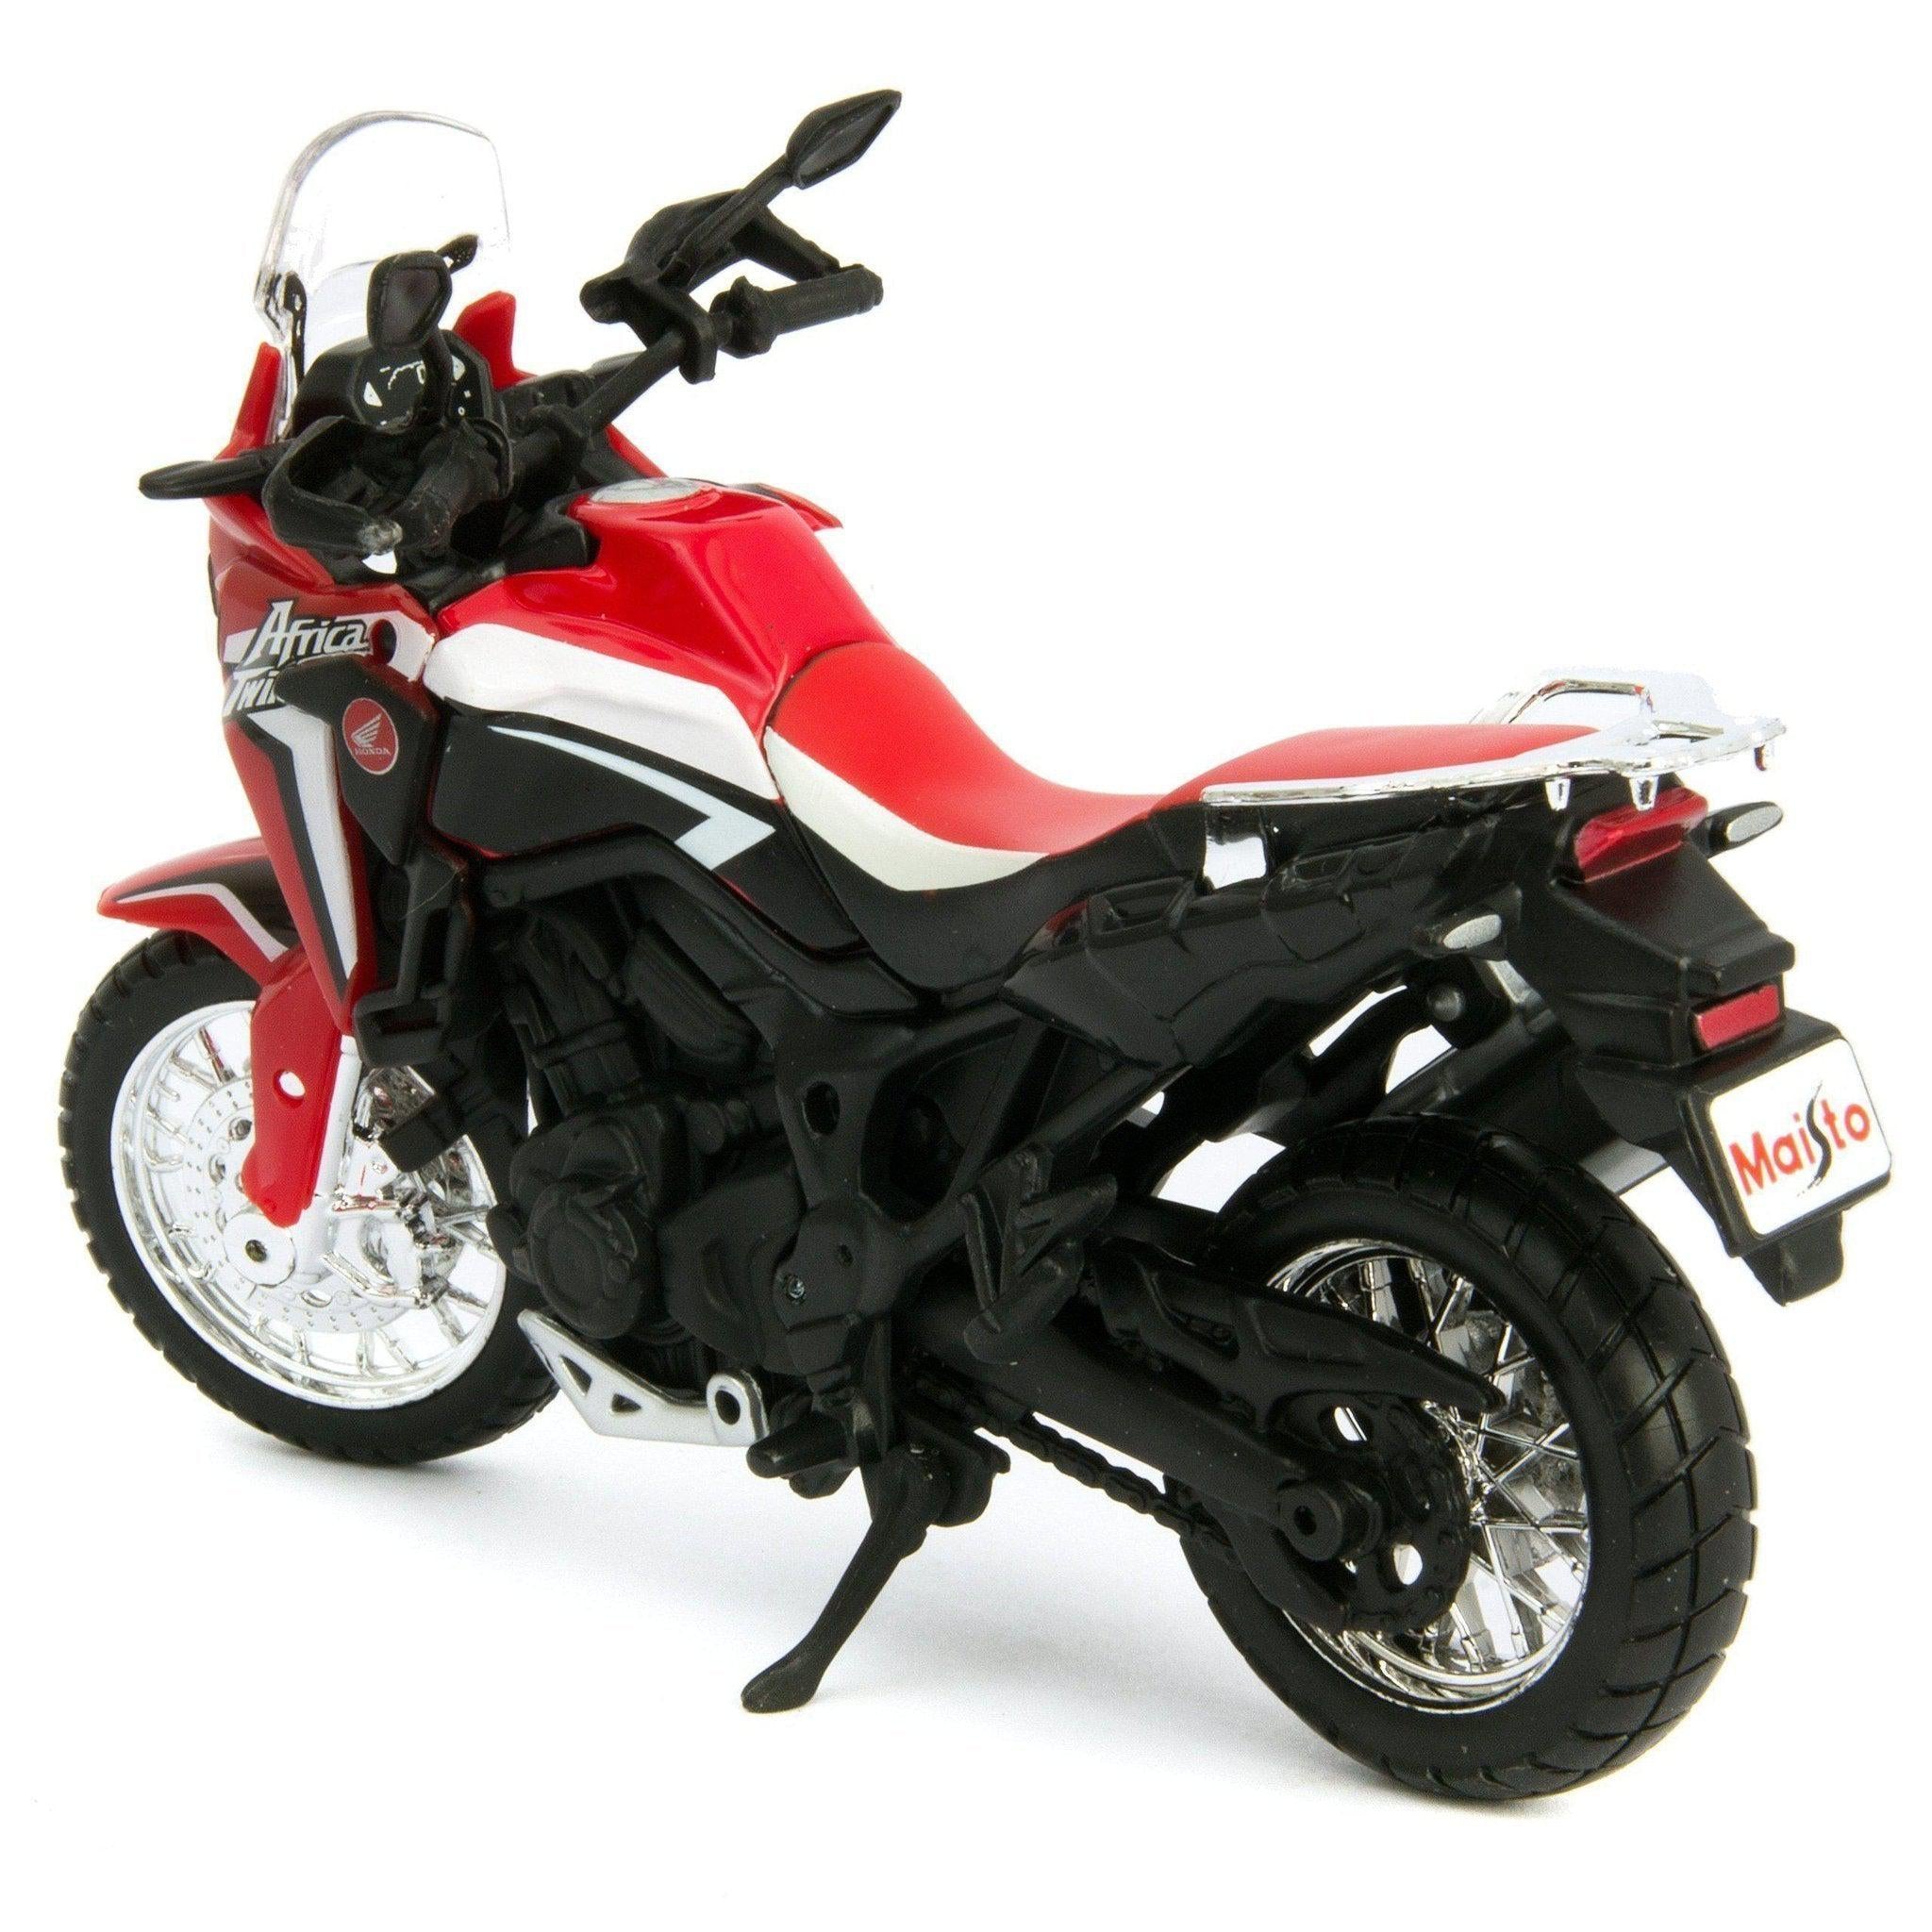 Honda Africa Twin DCT Diecast Model Motorcycle - 1:18 Scale-Maisto-Diecast Model Centre